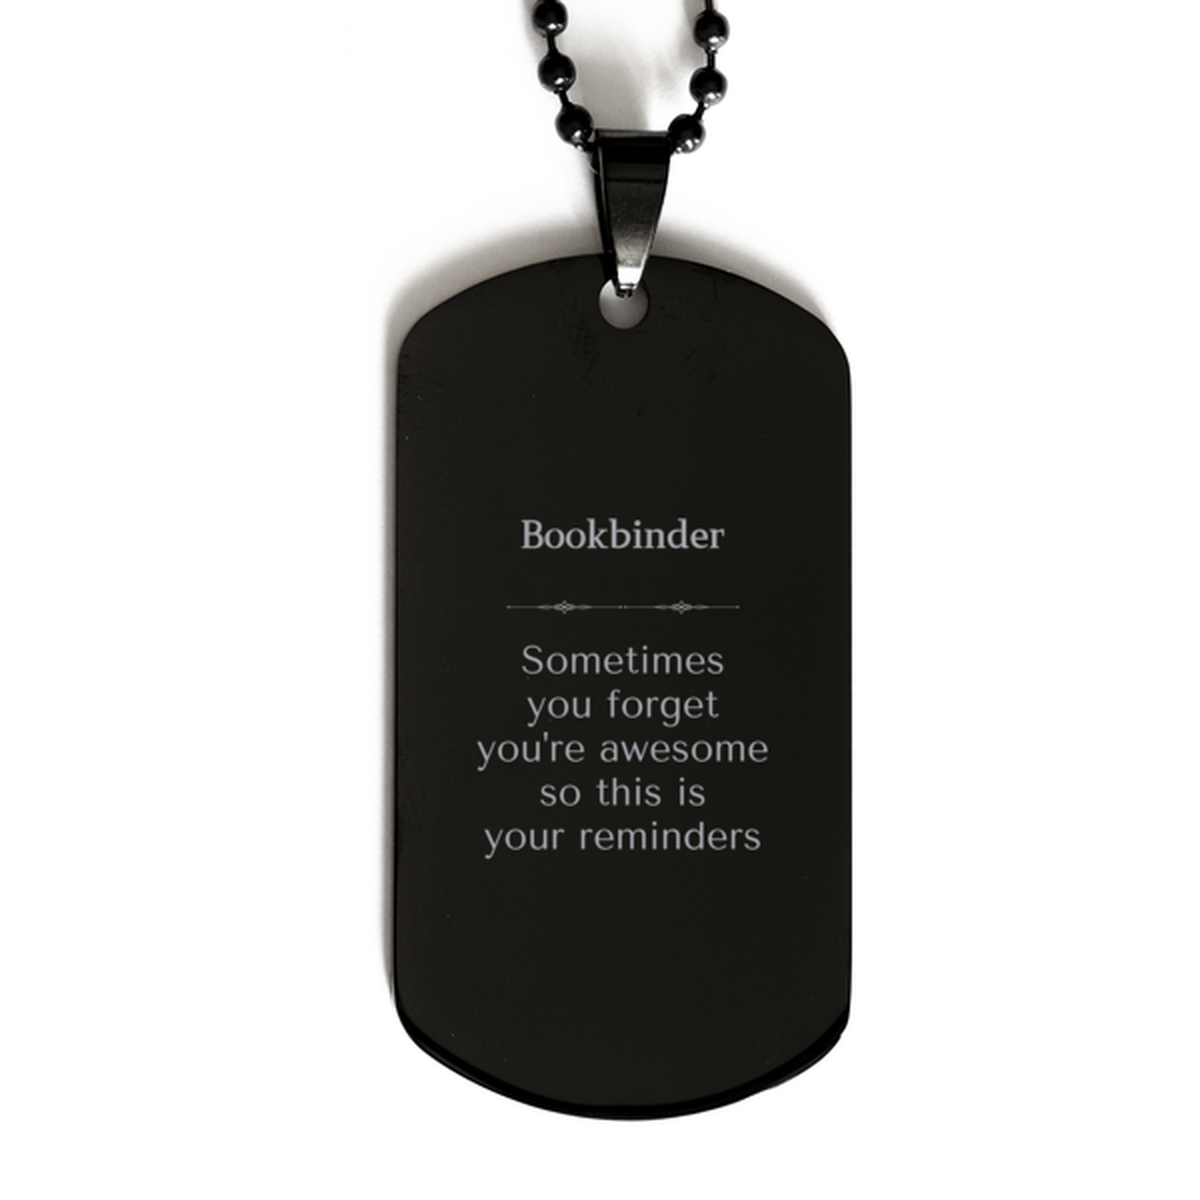 Sentimental Bookbinder Black Dog Tag, Bookbinder Sometimes you forget you're awesome so this is your reminders, Graduation Christmas Birthday Gifts for Bookbinder, Men, Women, Coworkers